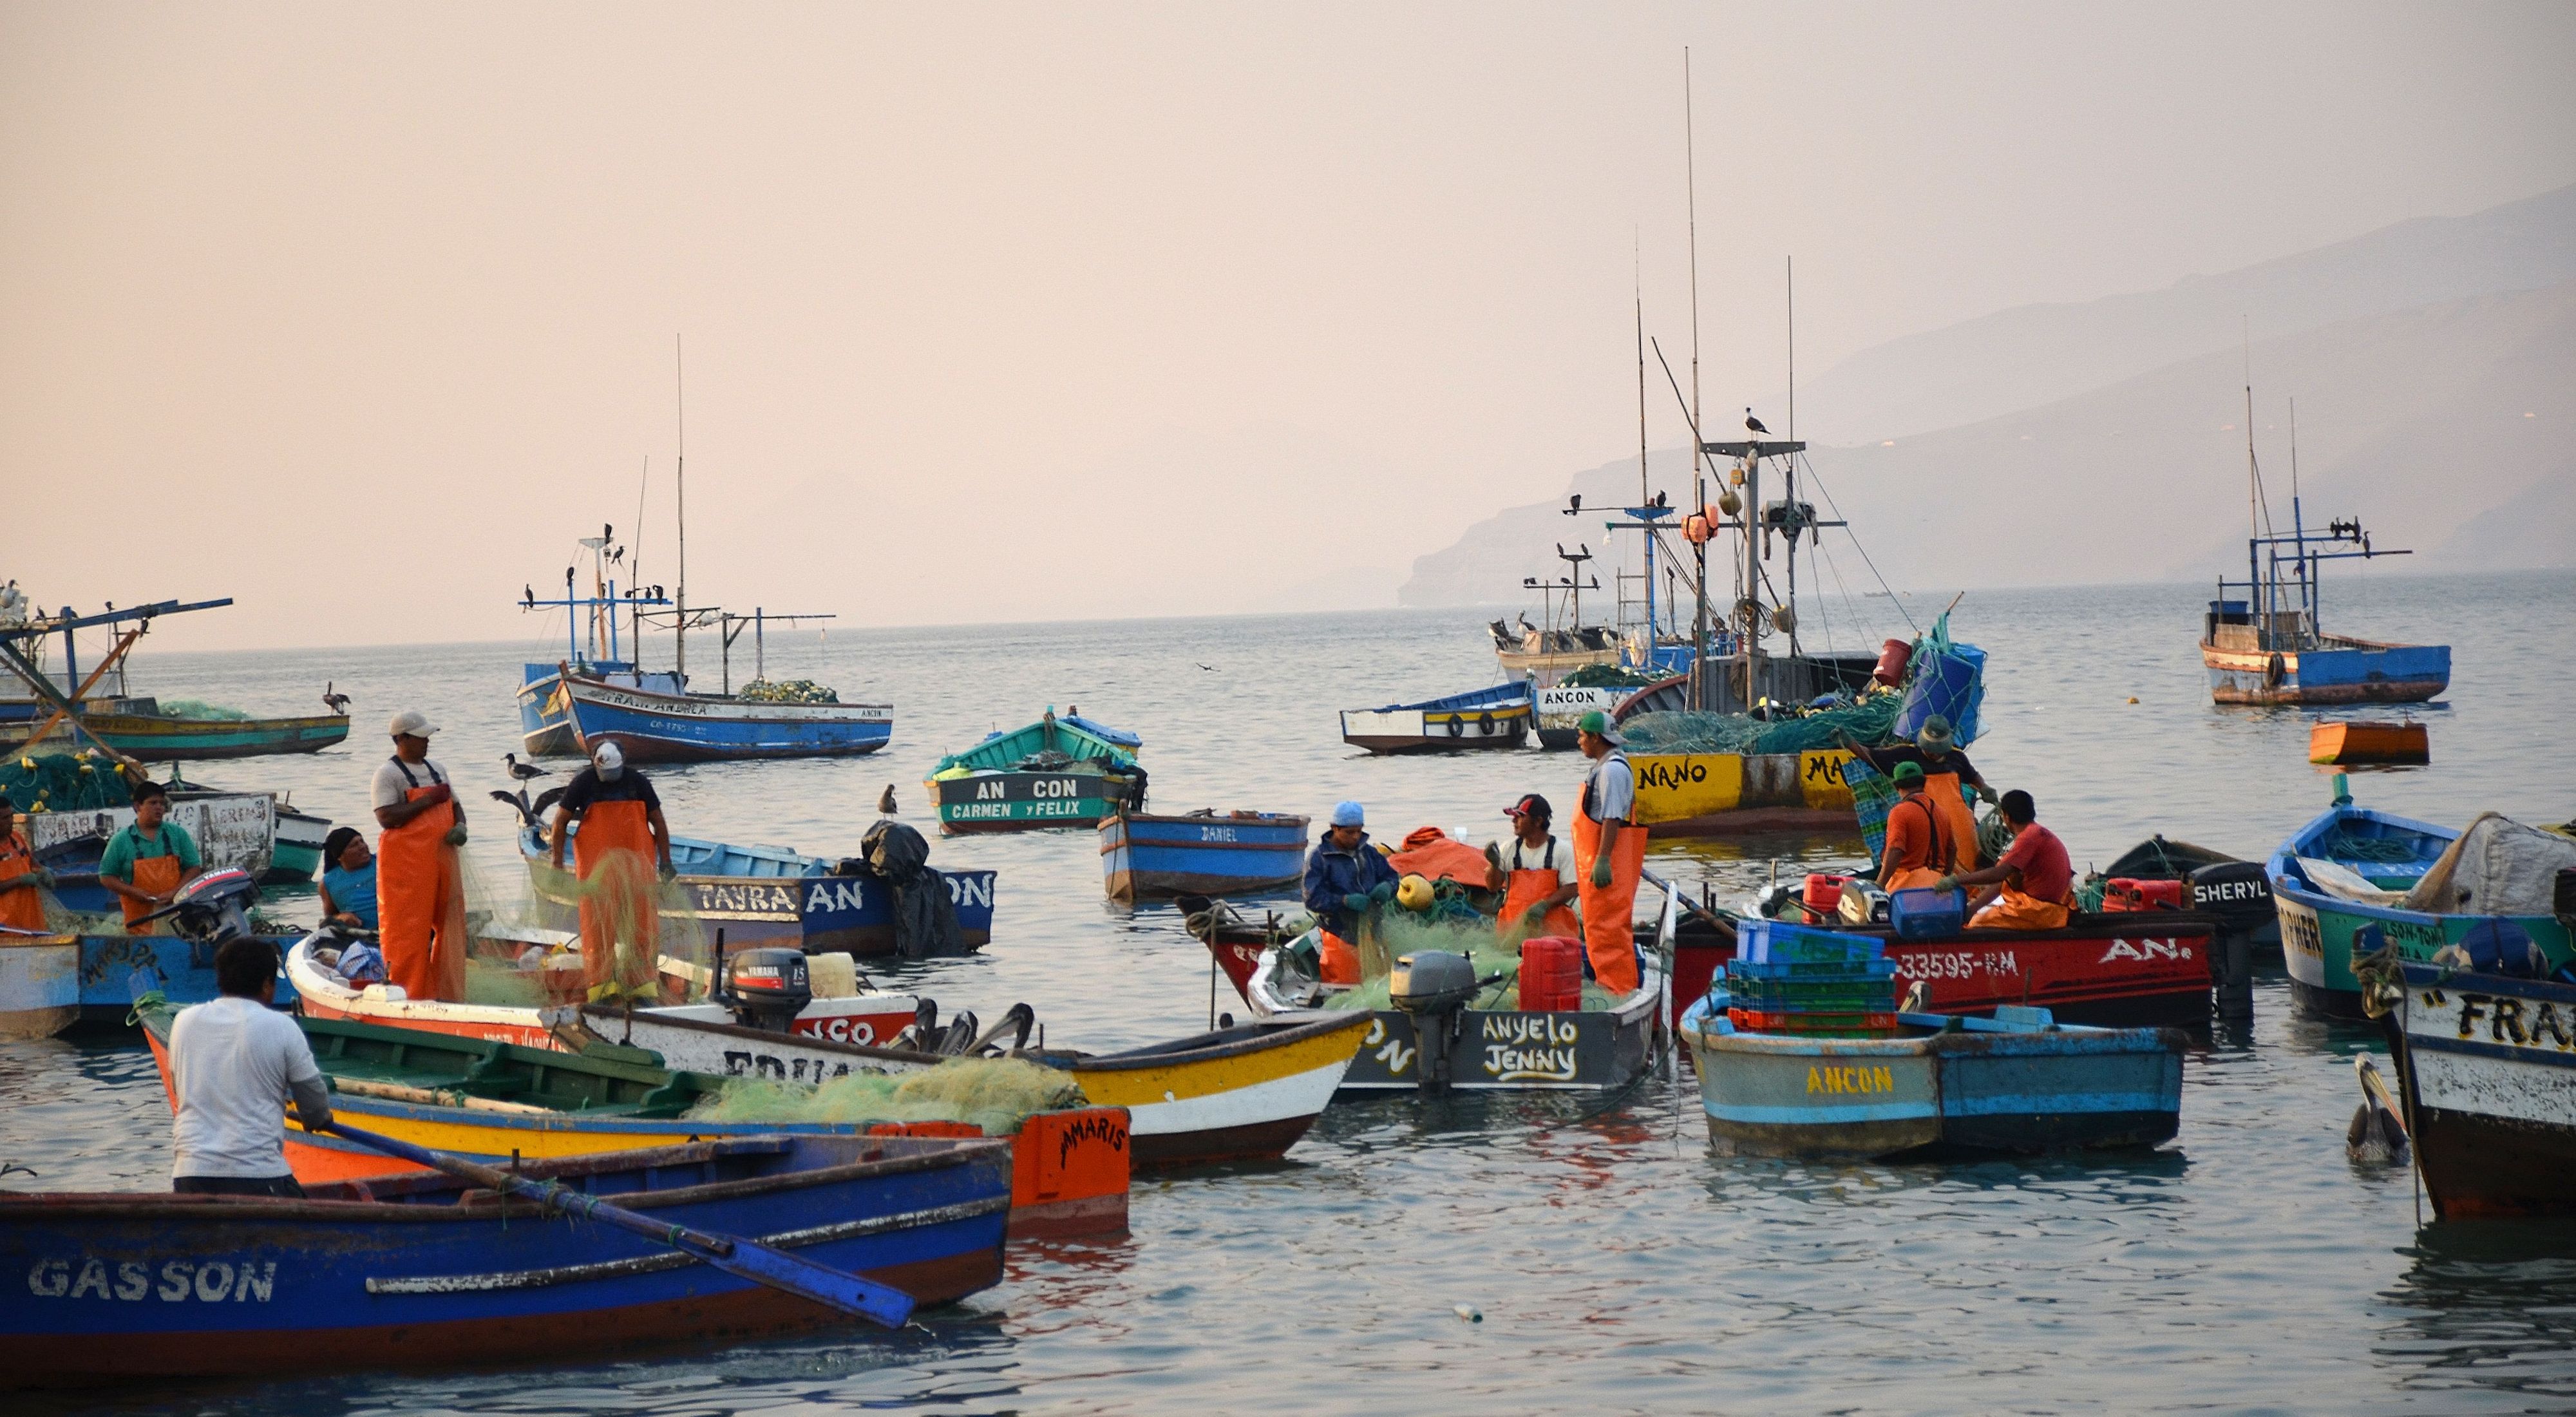 Coastal fishing communities and tides affect their daily life and culture